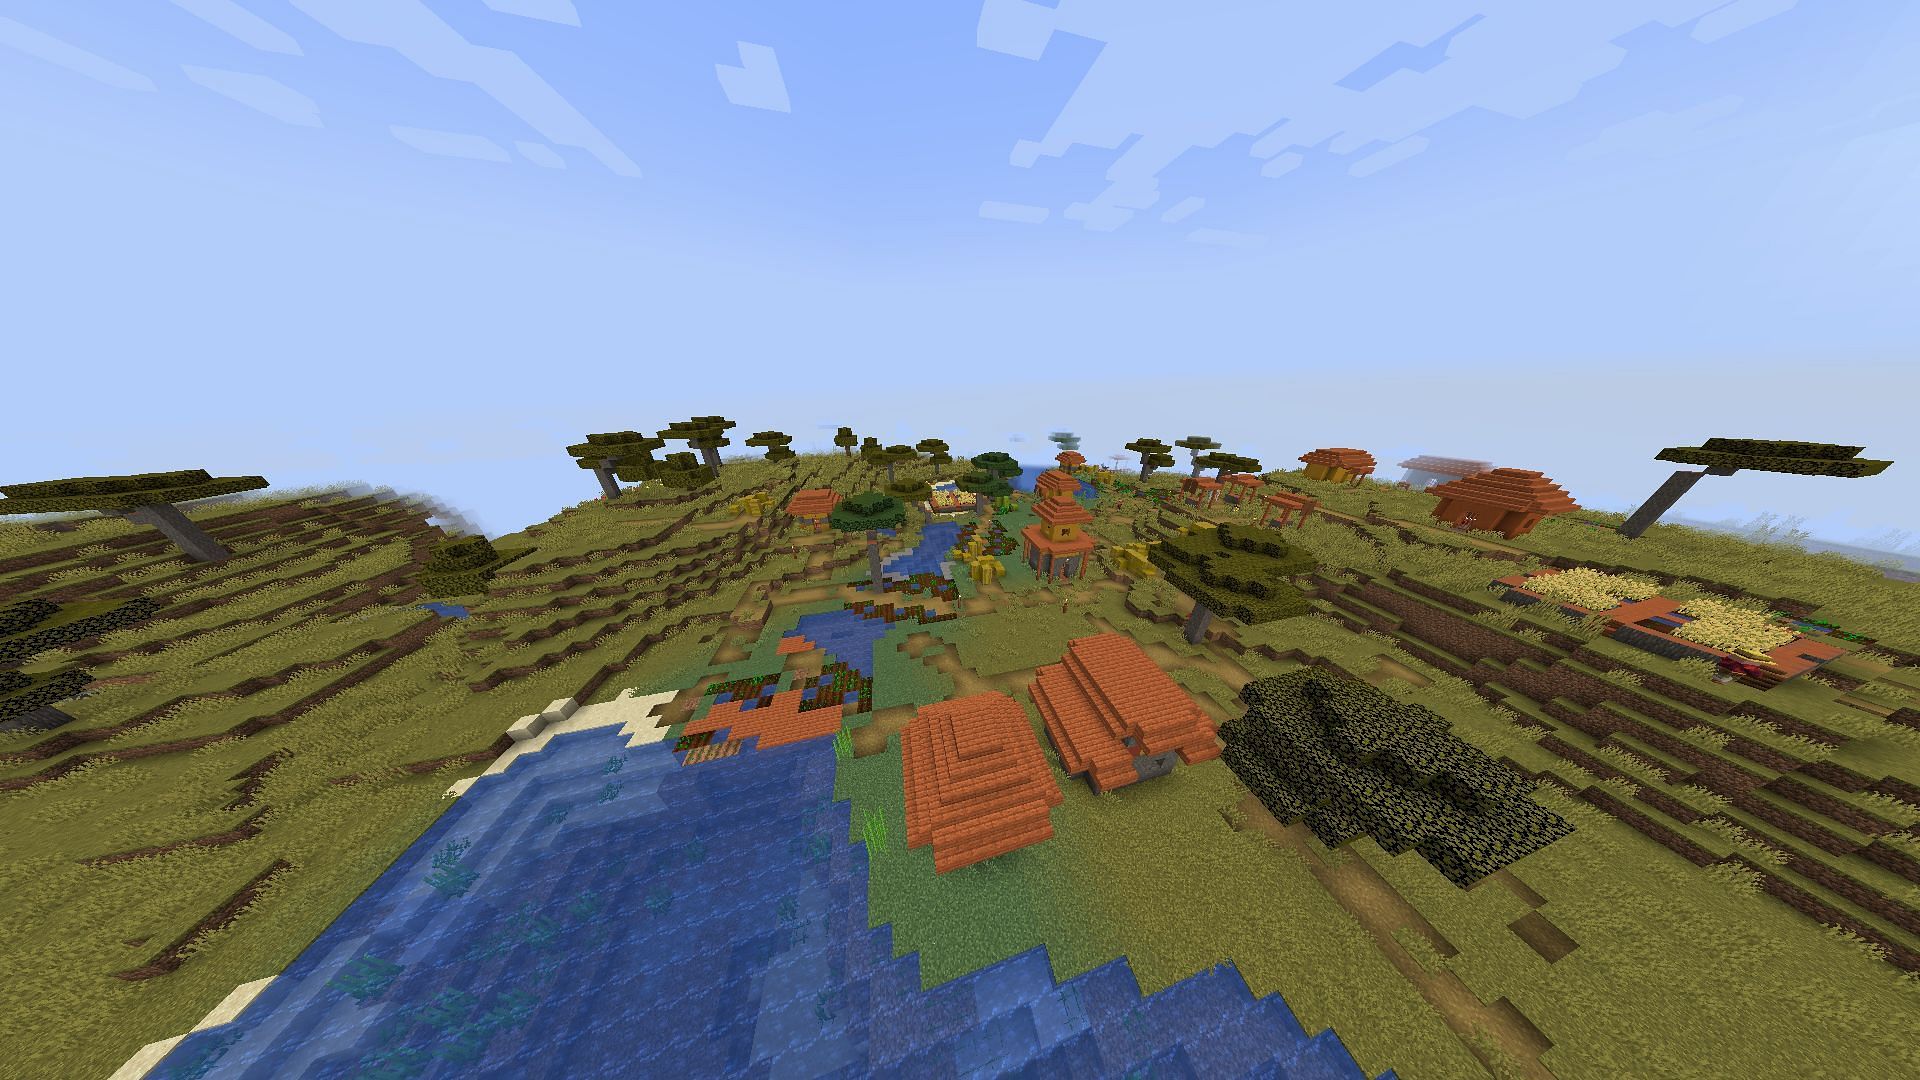 One of the four savanna villages in this seed (Image via Minecraft)